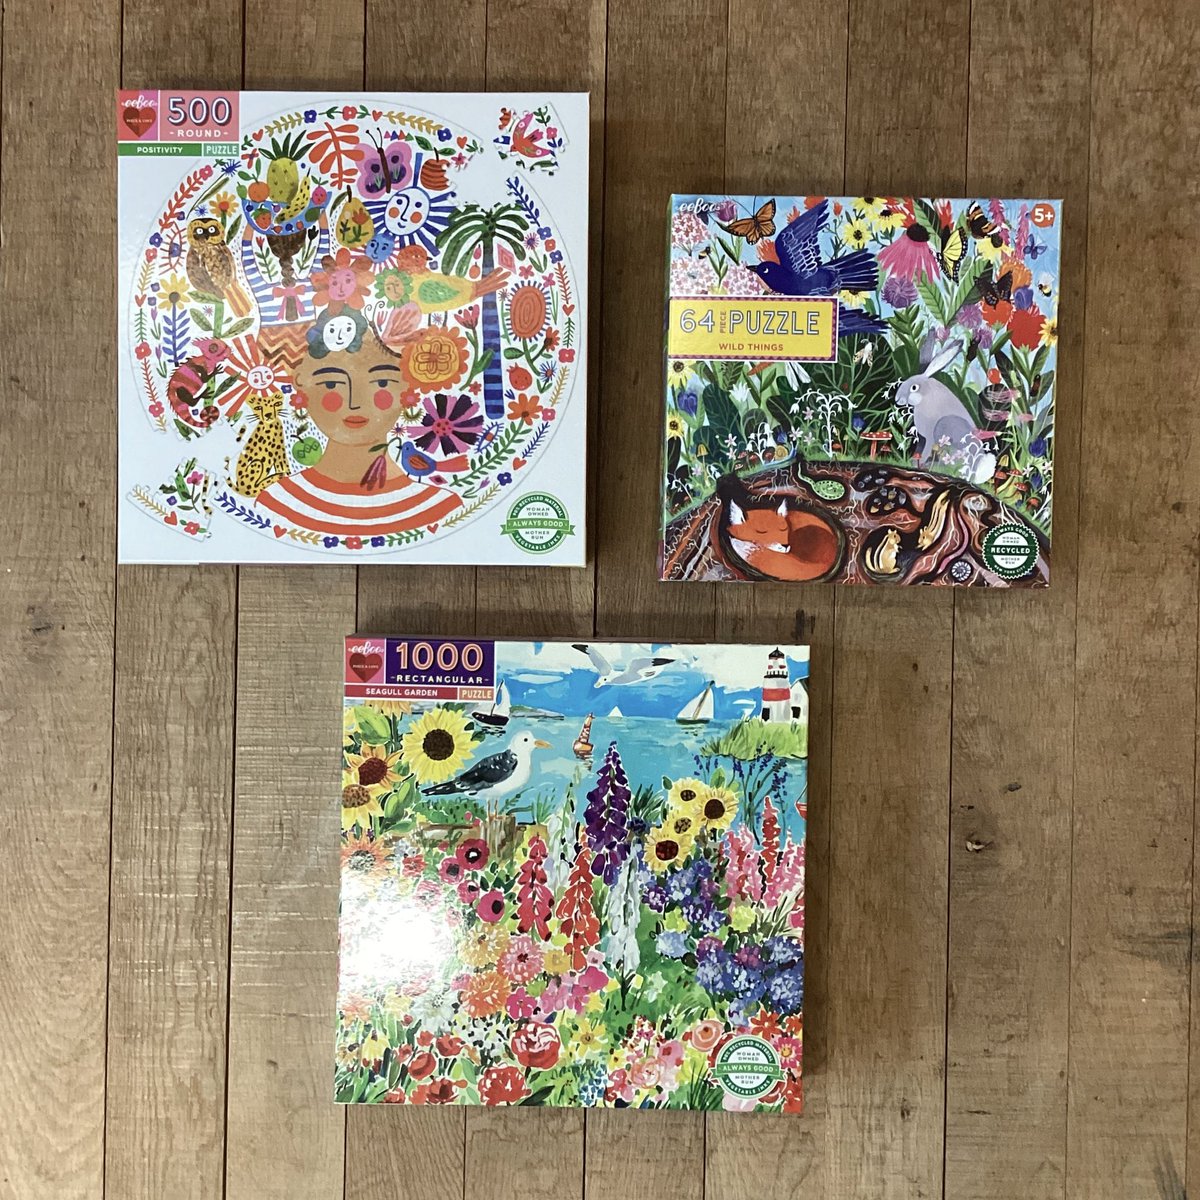 Take shelter from the rainy Irish days with a beautifully illustrated puzzle from our gallery shop ✨ We have lots of different sizes and designs available to suit all ages and interests. Pop in store or order online to get your hands on one today! glucksmanshop.com